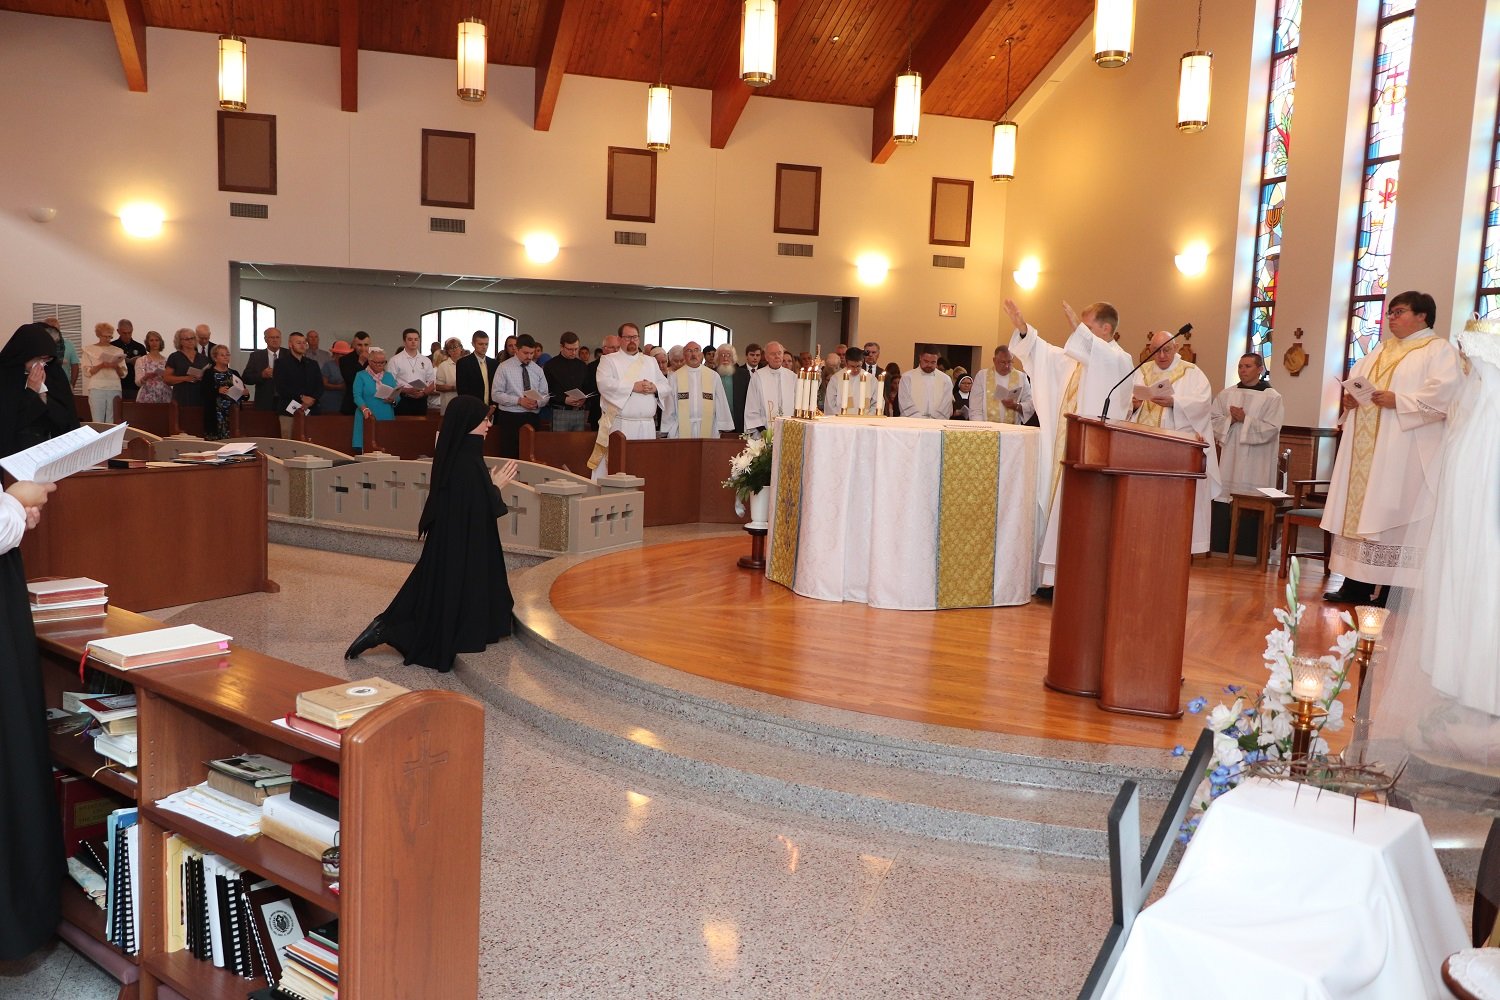  The Solemn Consecration: Holy Mother Church, acting through Fr. Tony, embraces Sister Frances Marie’s self-offering and solemnly dedicates her to the service of God 